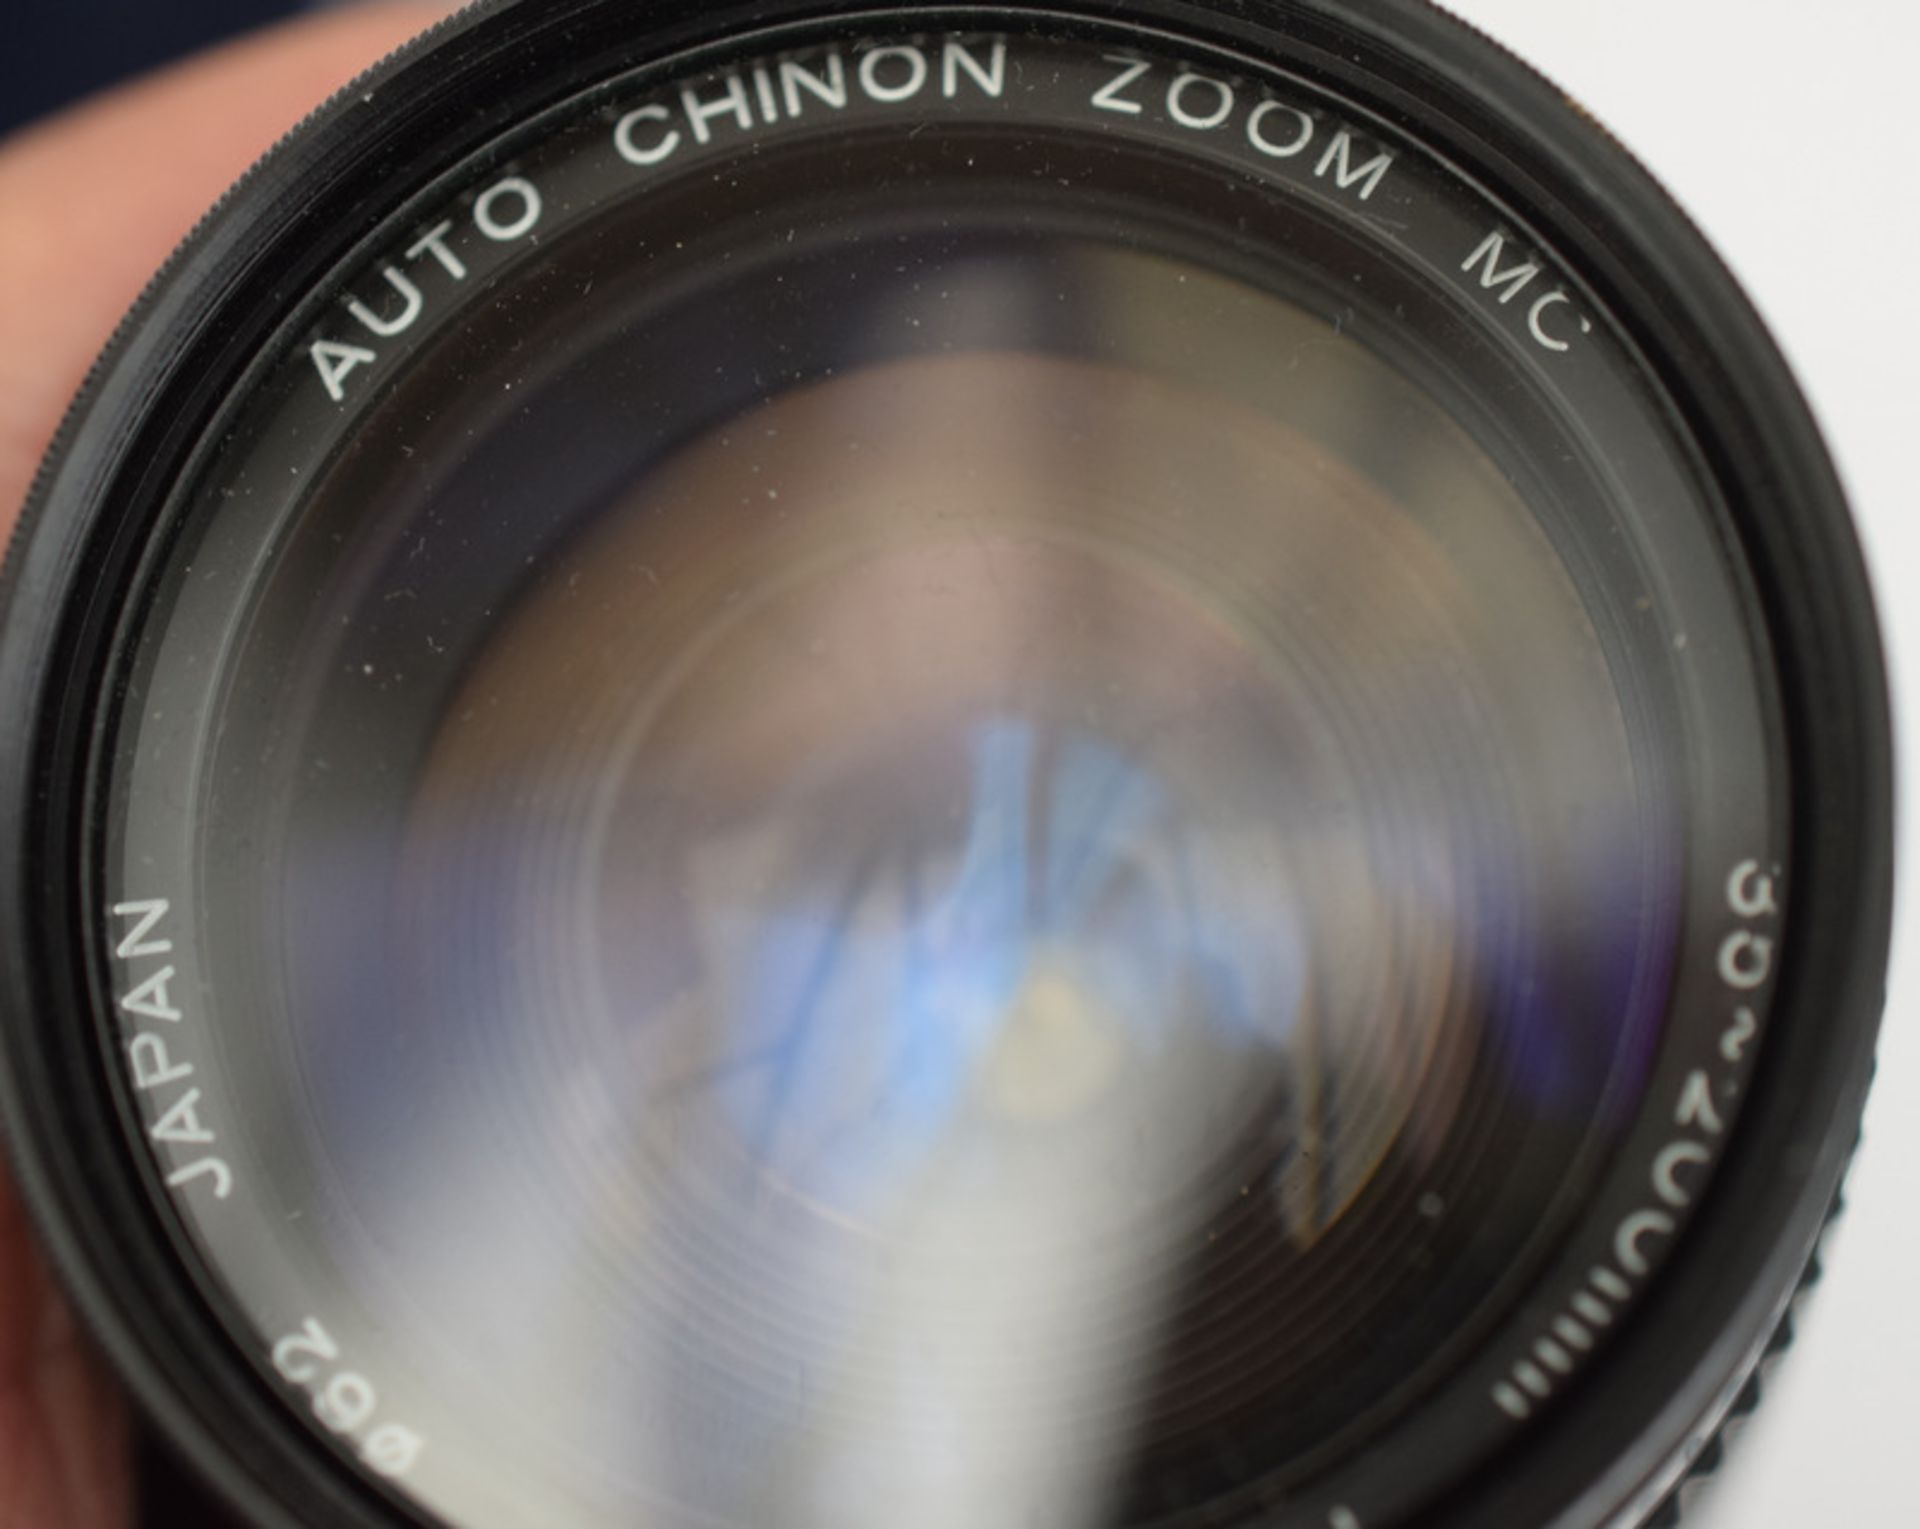 Auto Chinon Zoom Lens In Soft Case - Image 2 of 4